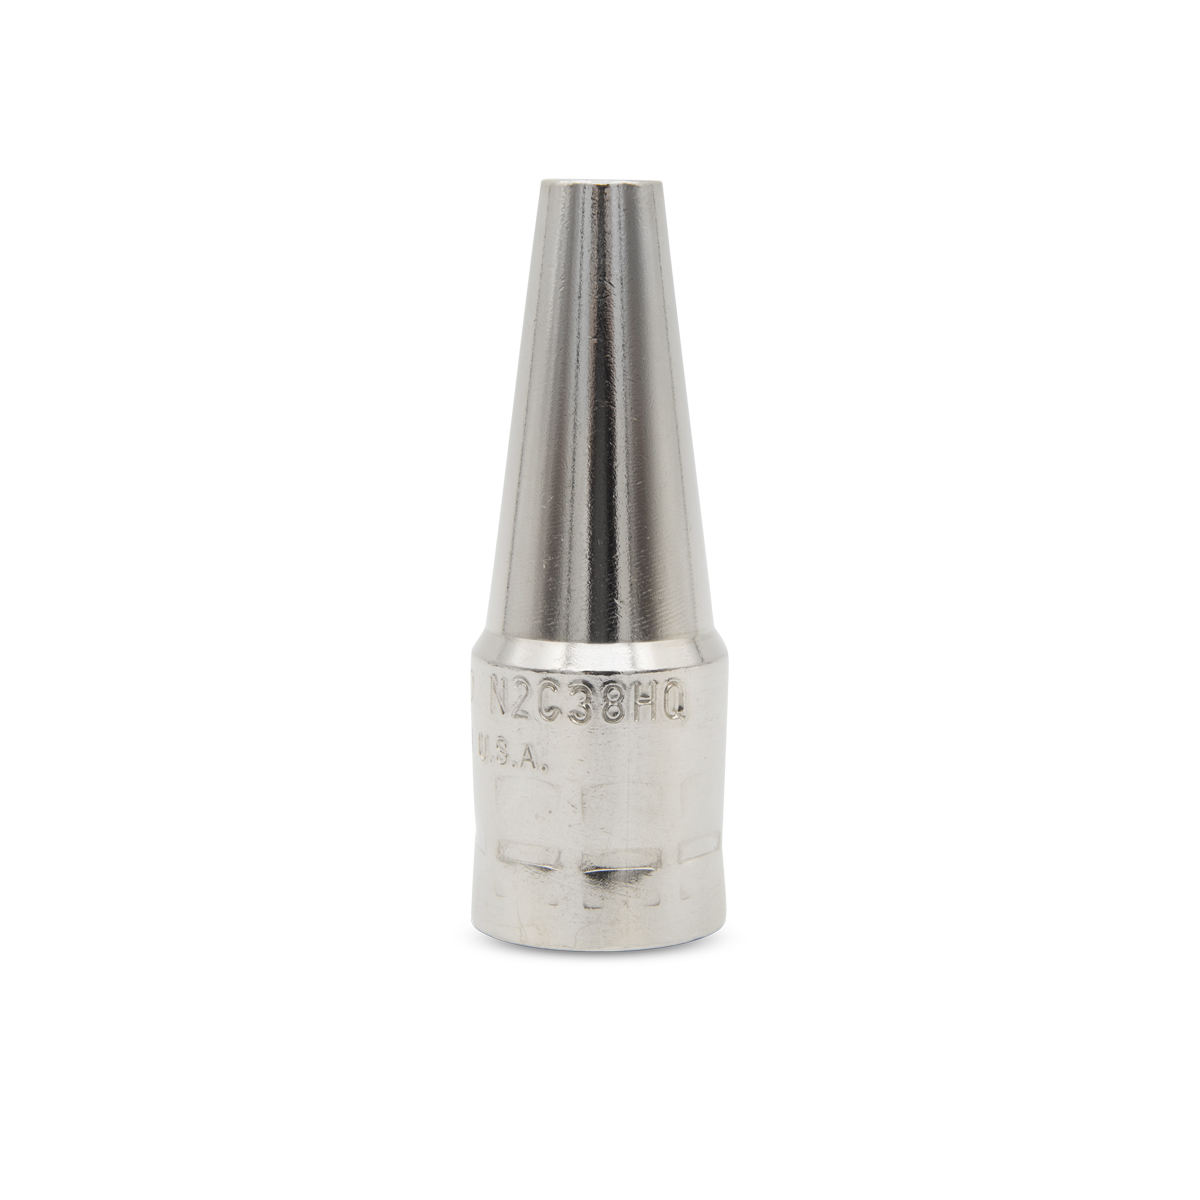 Bernard N2C38HQ Quick Tip Consumables Nozzles Threaded 3/8 for Quick Tip Series 2 Contact Tip 